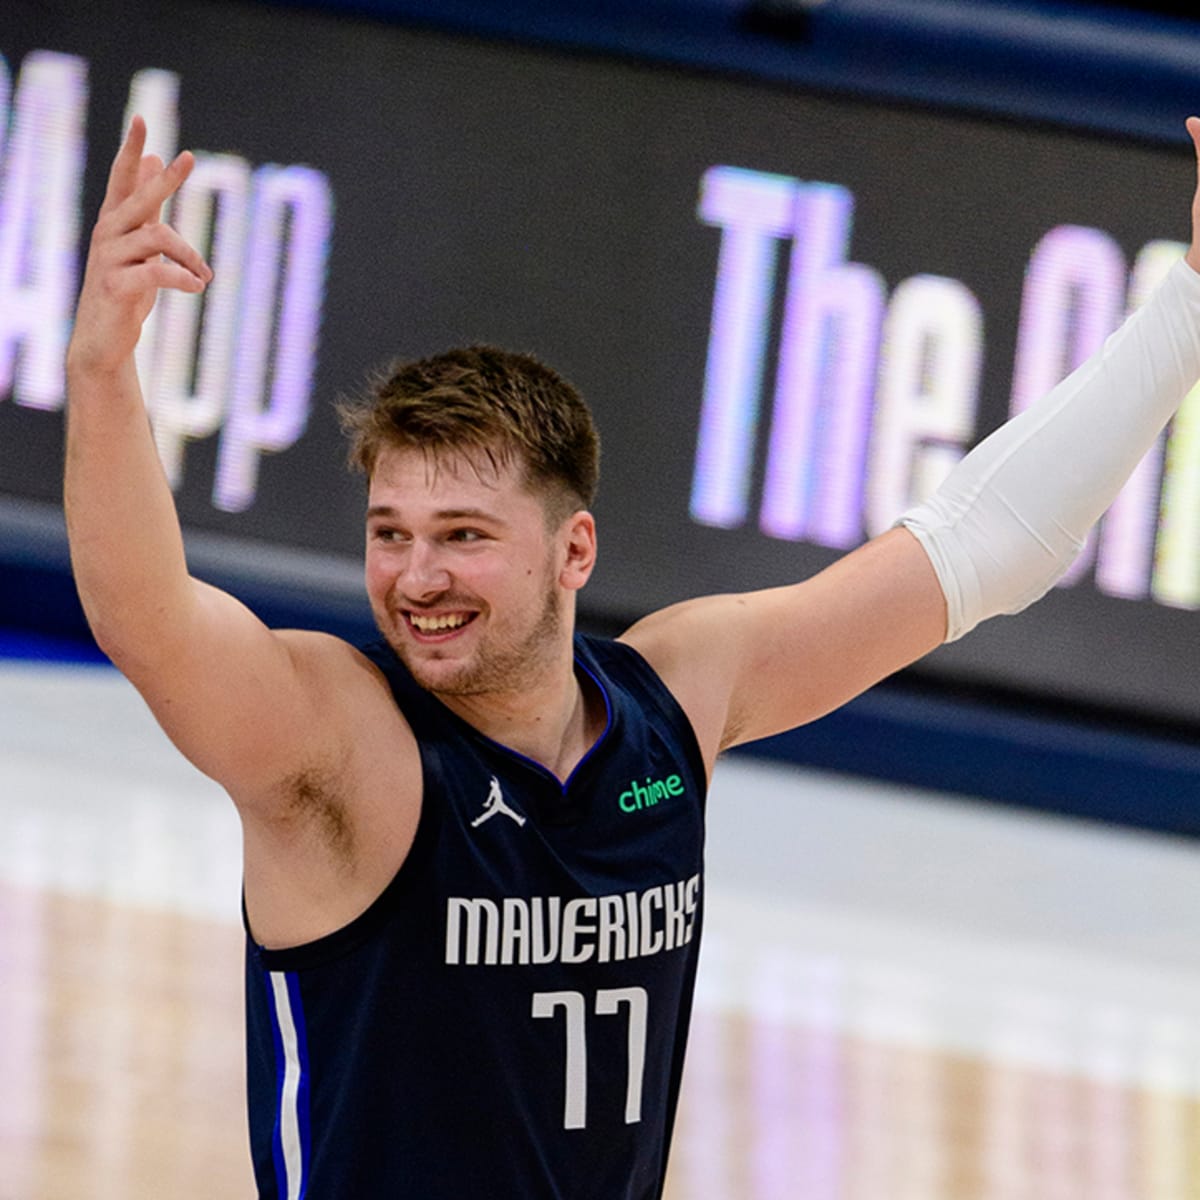 Mavericks star Luka Doncic reportedly extends shoe contract with